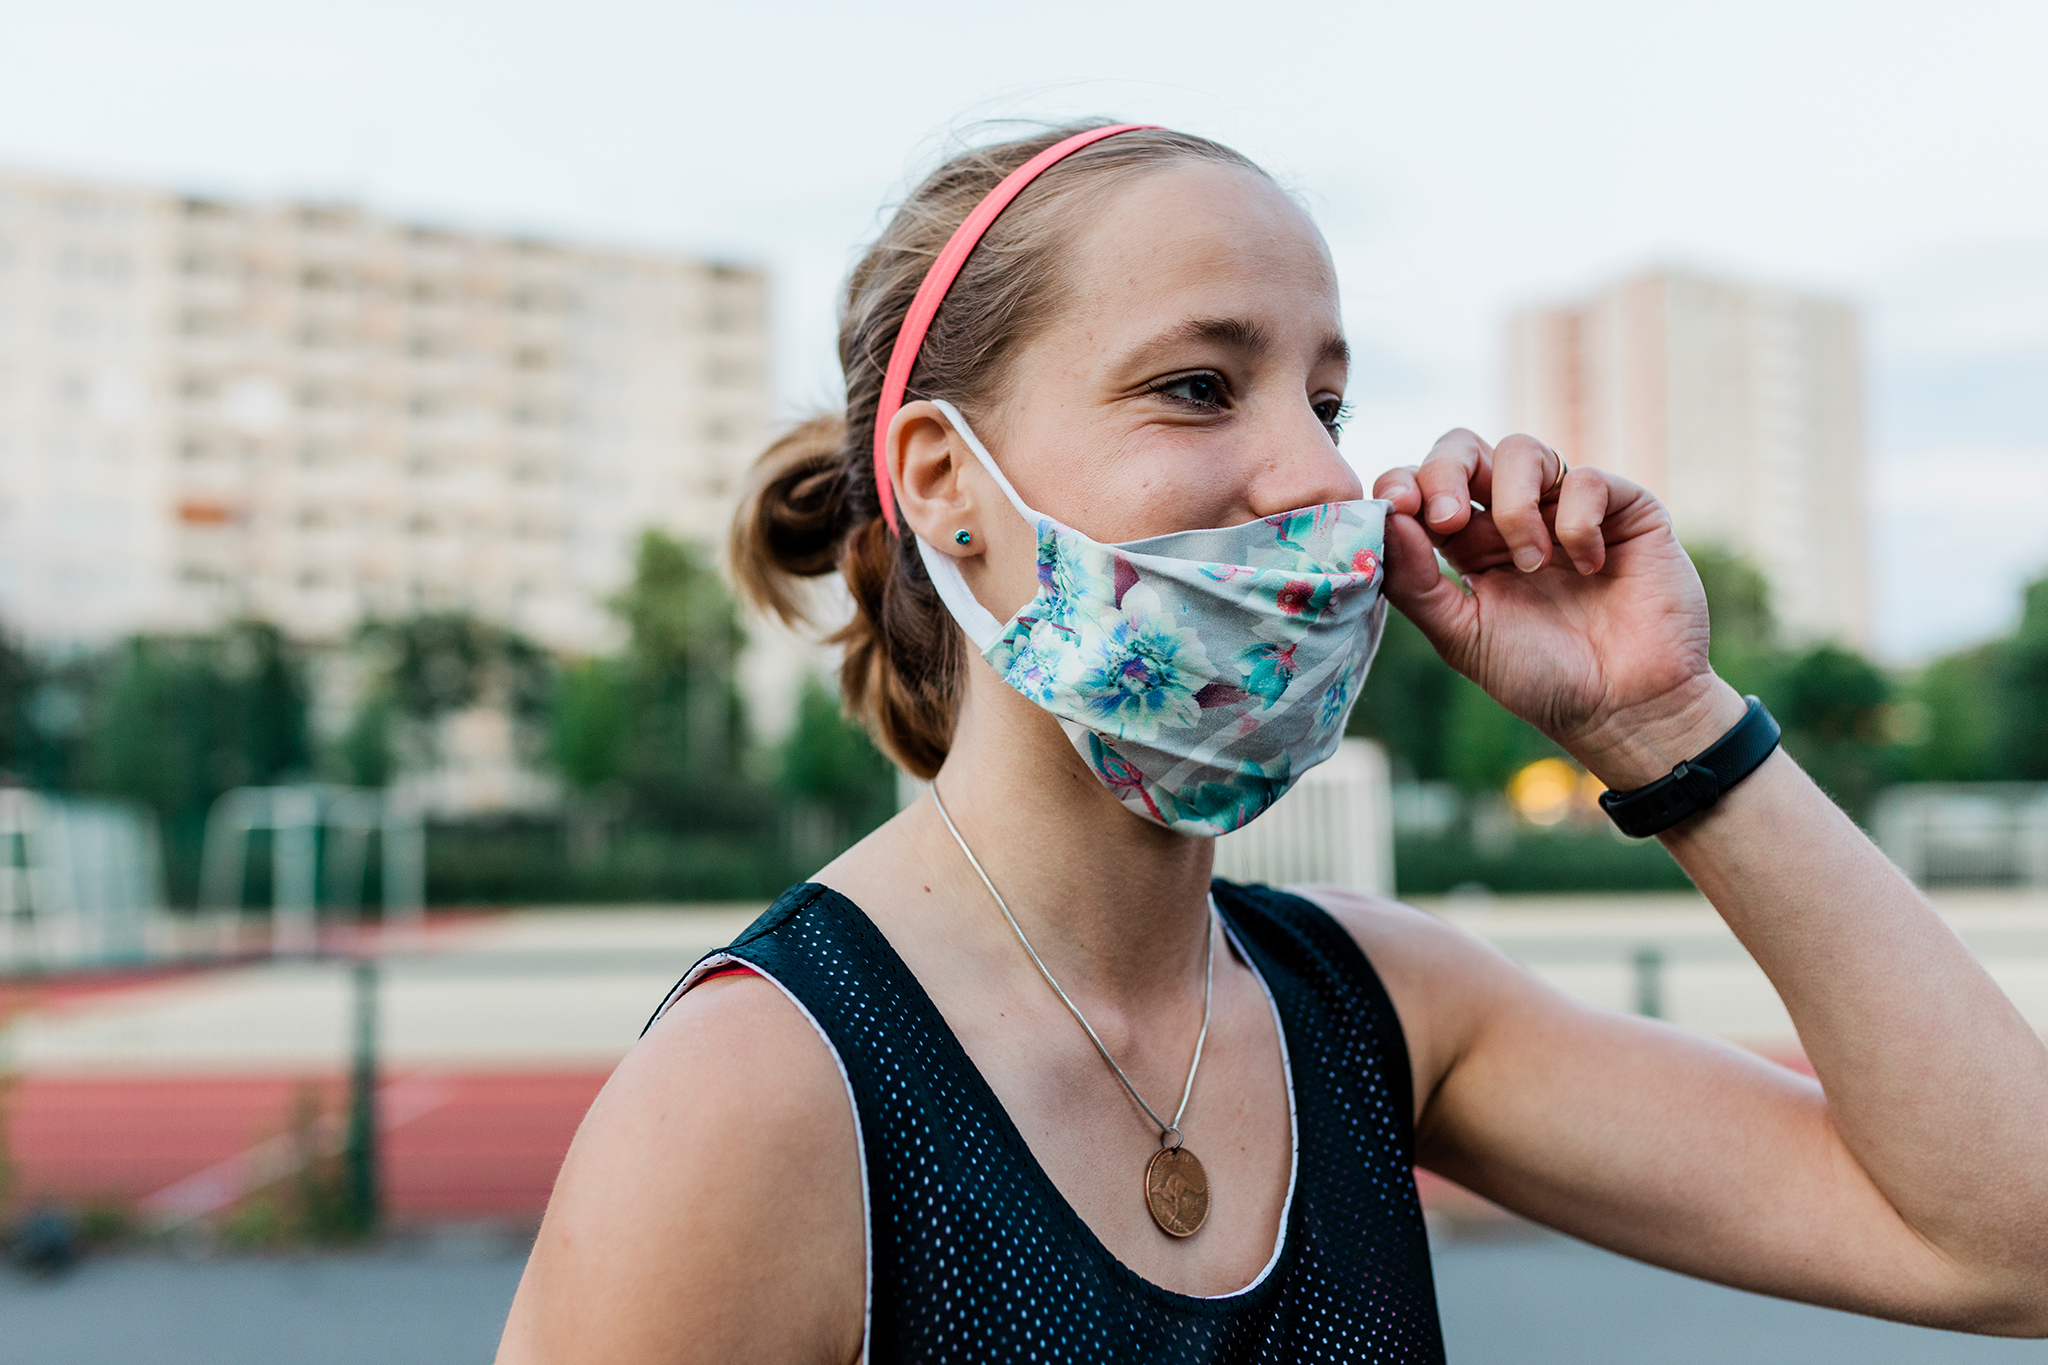 Uncomfortable in your face mask? This can breathing easier